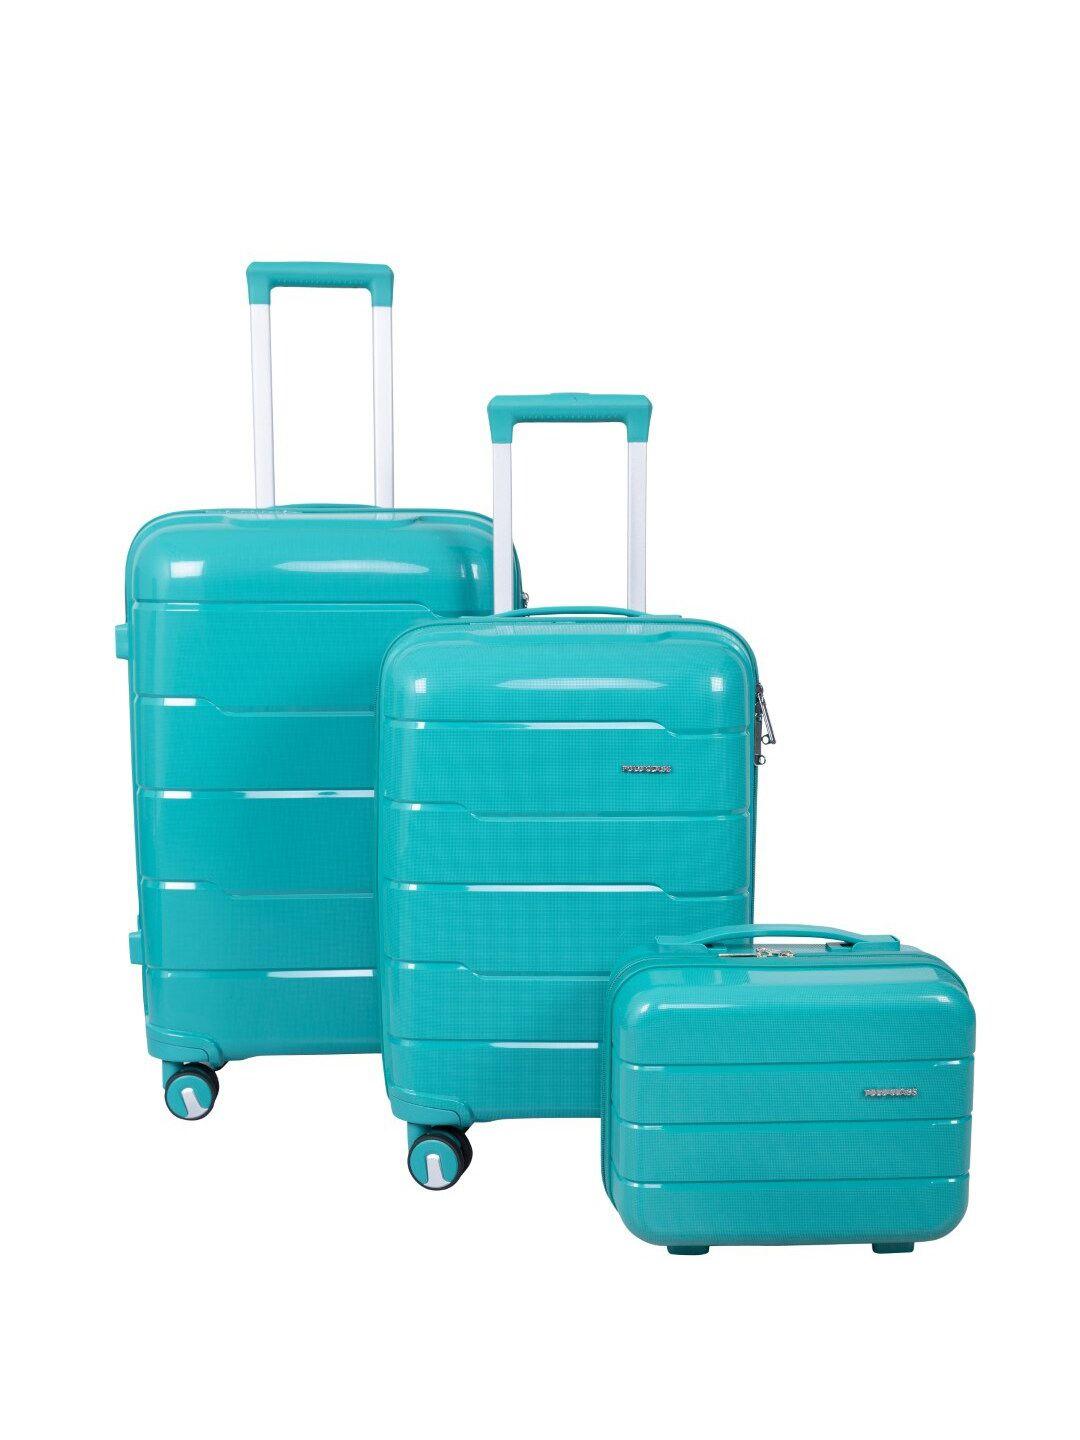 polo class hard-sided trolley suitcases with 1 vanity bags